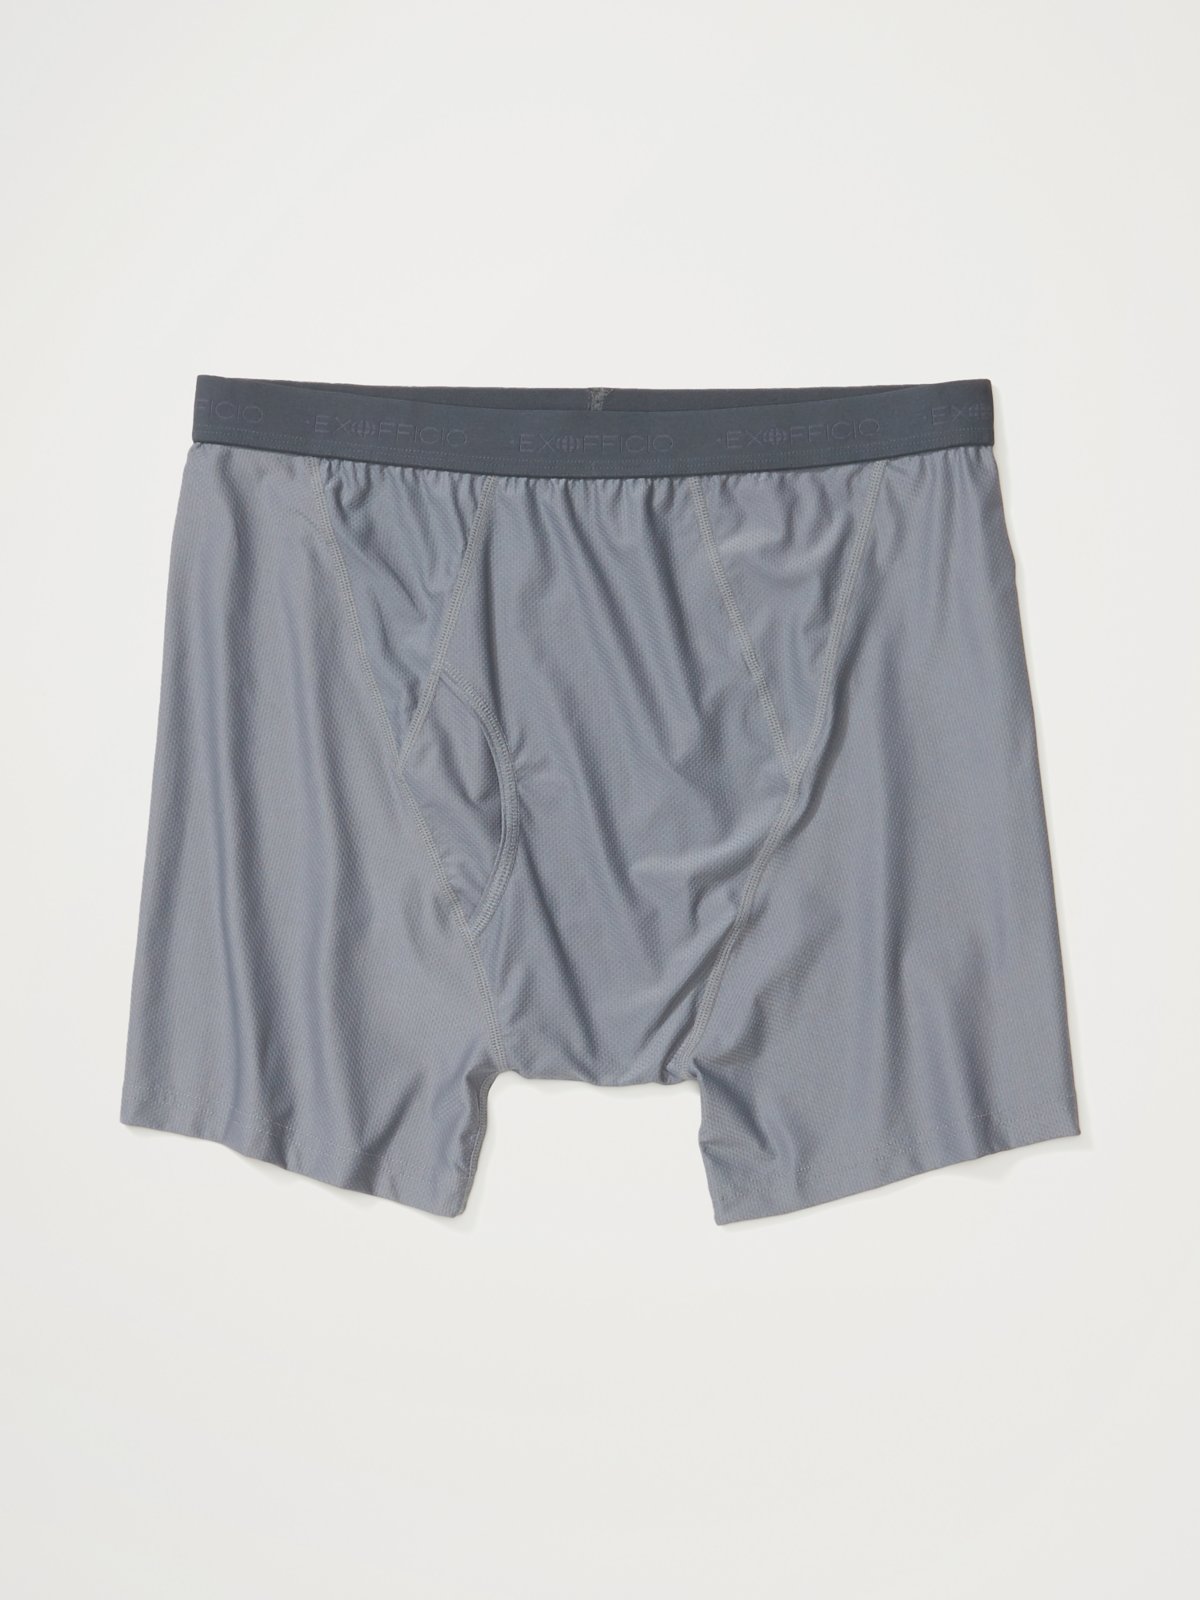 mens give n go 2 point 0 boxer brief